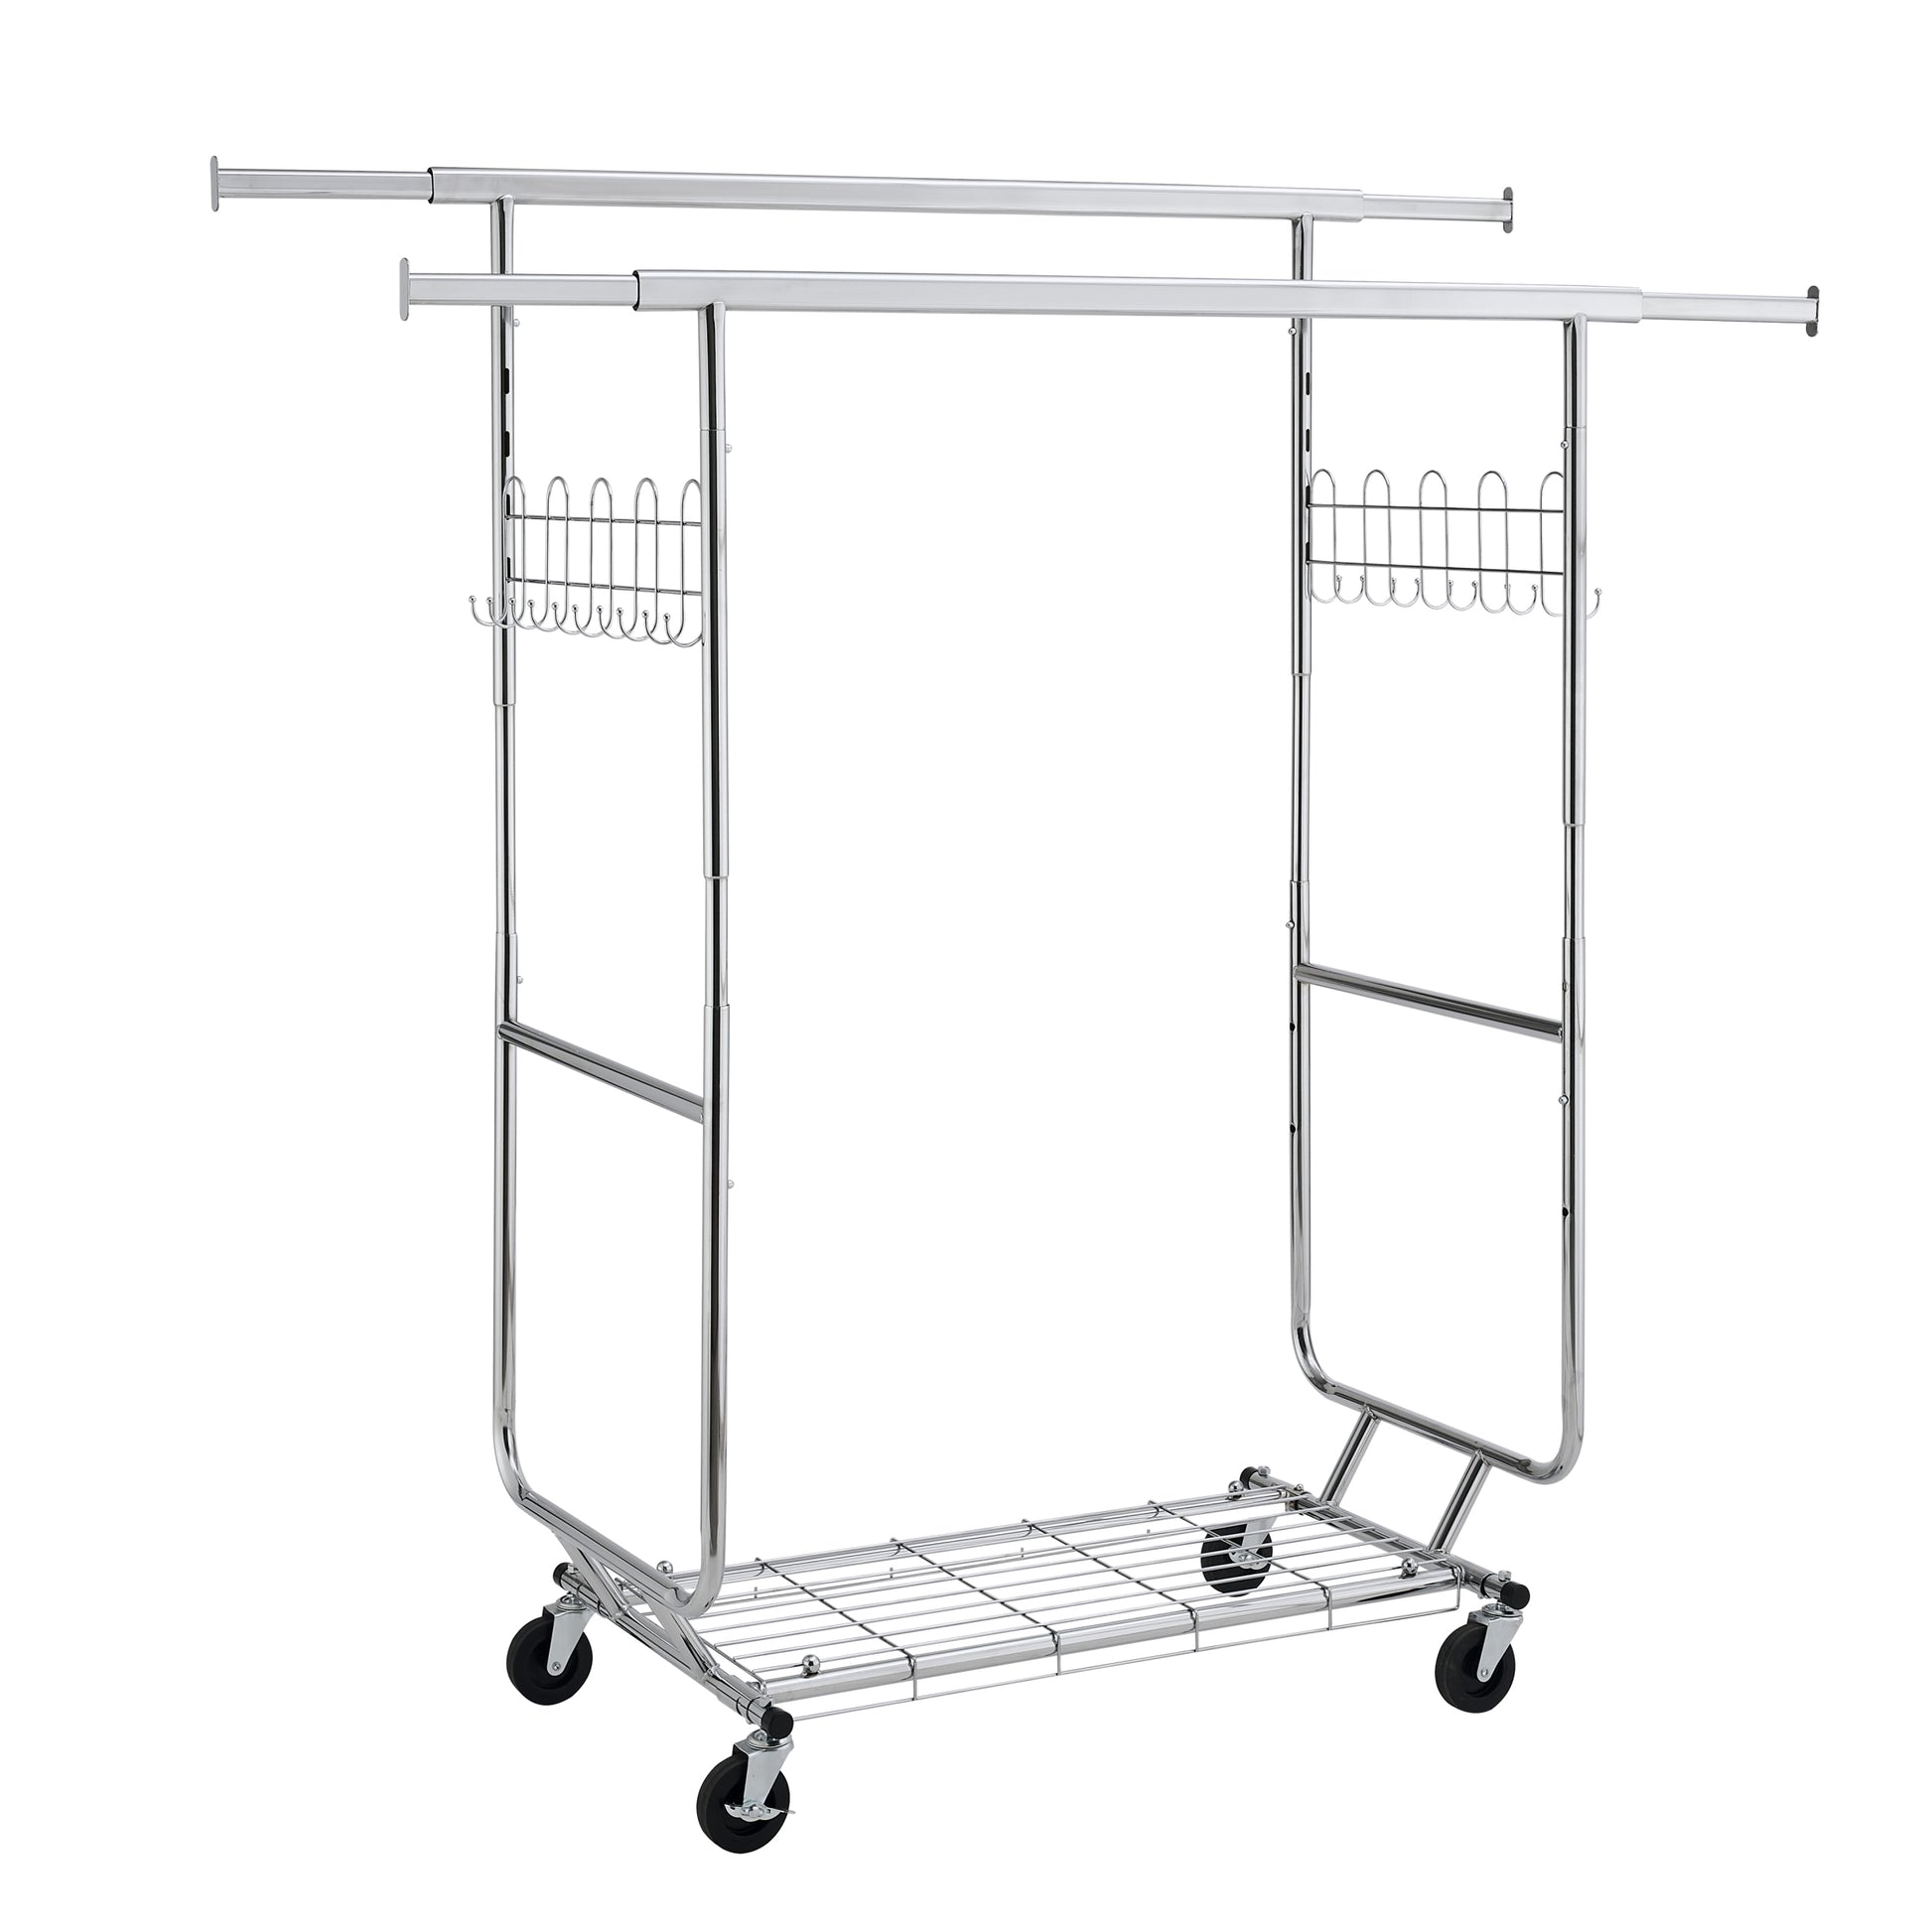 Double Clothing Garment Rack With Shelves